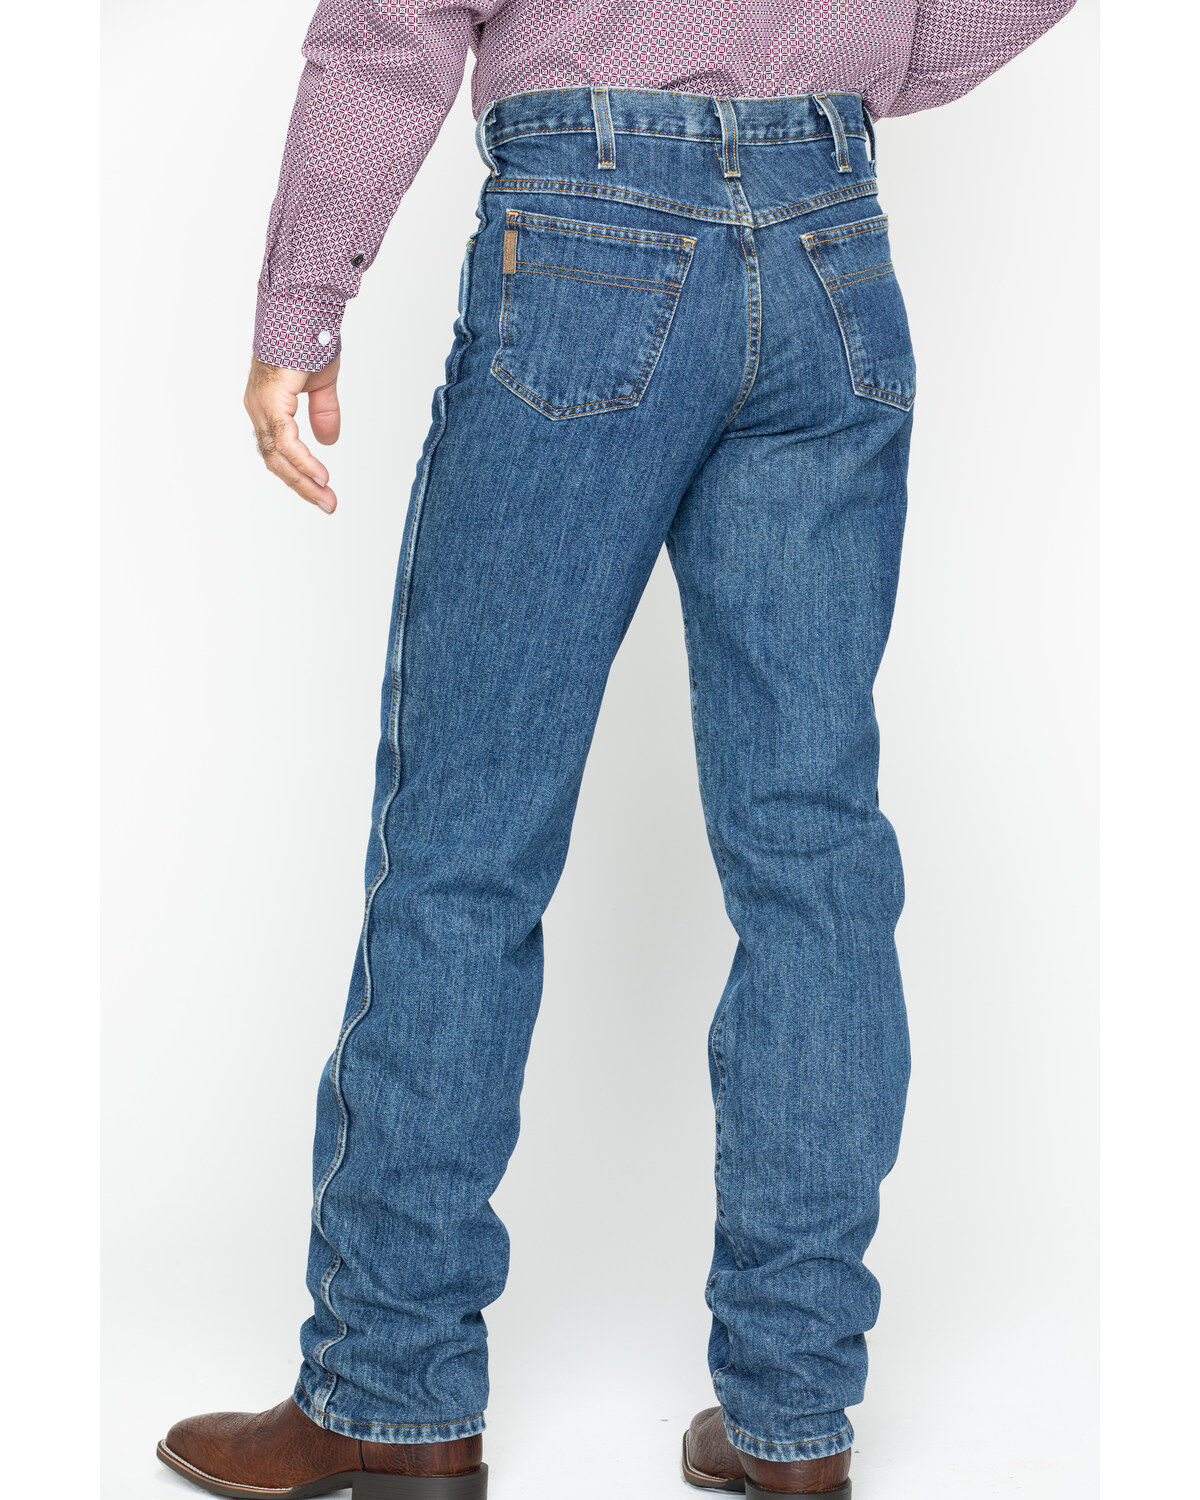 cinch jeans tractor supply